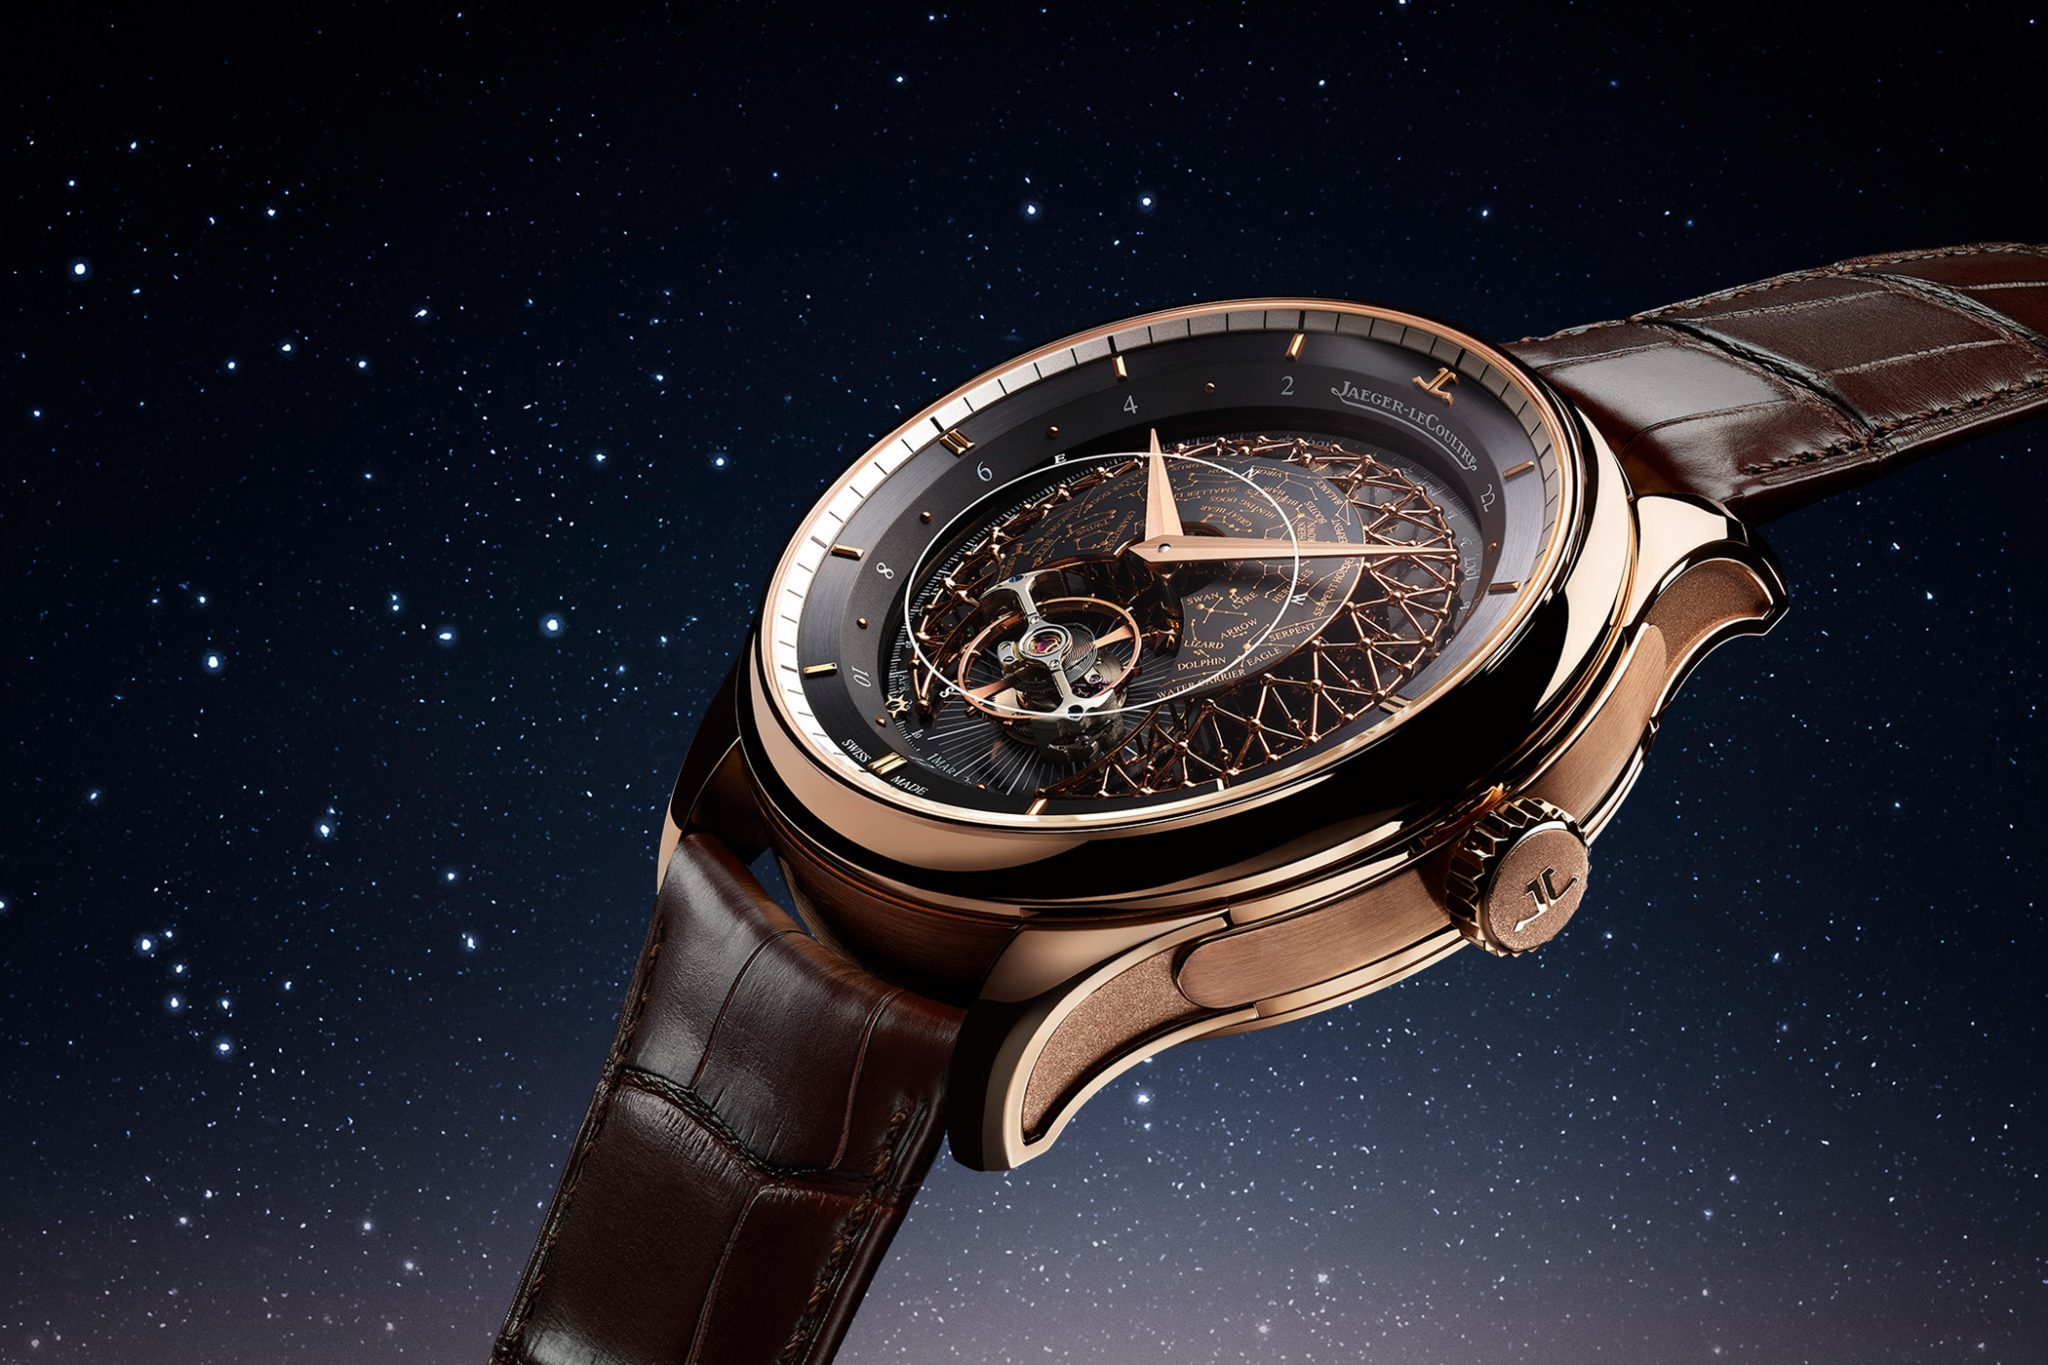 Jaeger-LeCoultre CEO Catherine Rénier on the Melodious Sounds of the ...